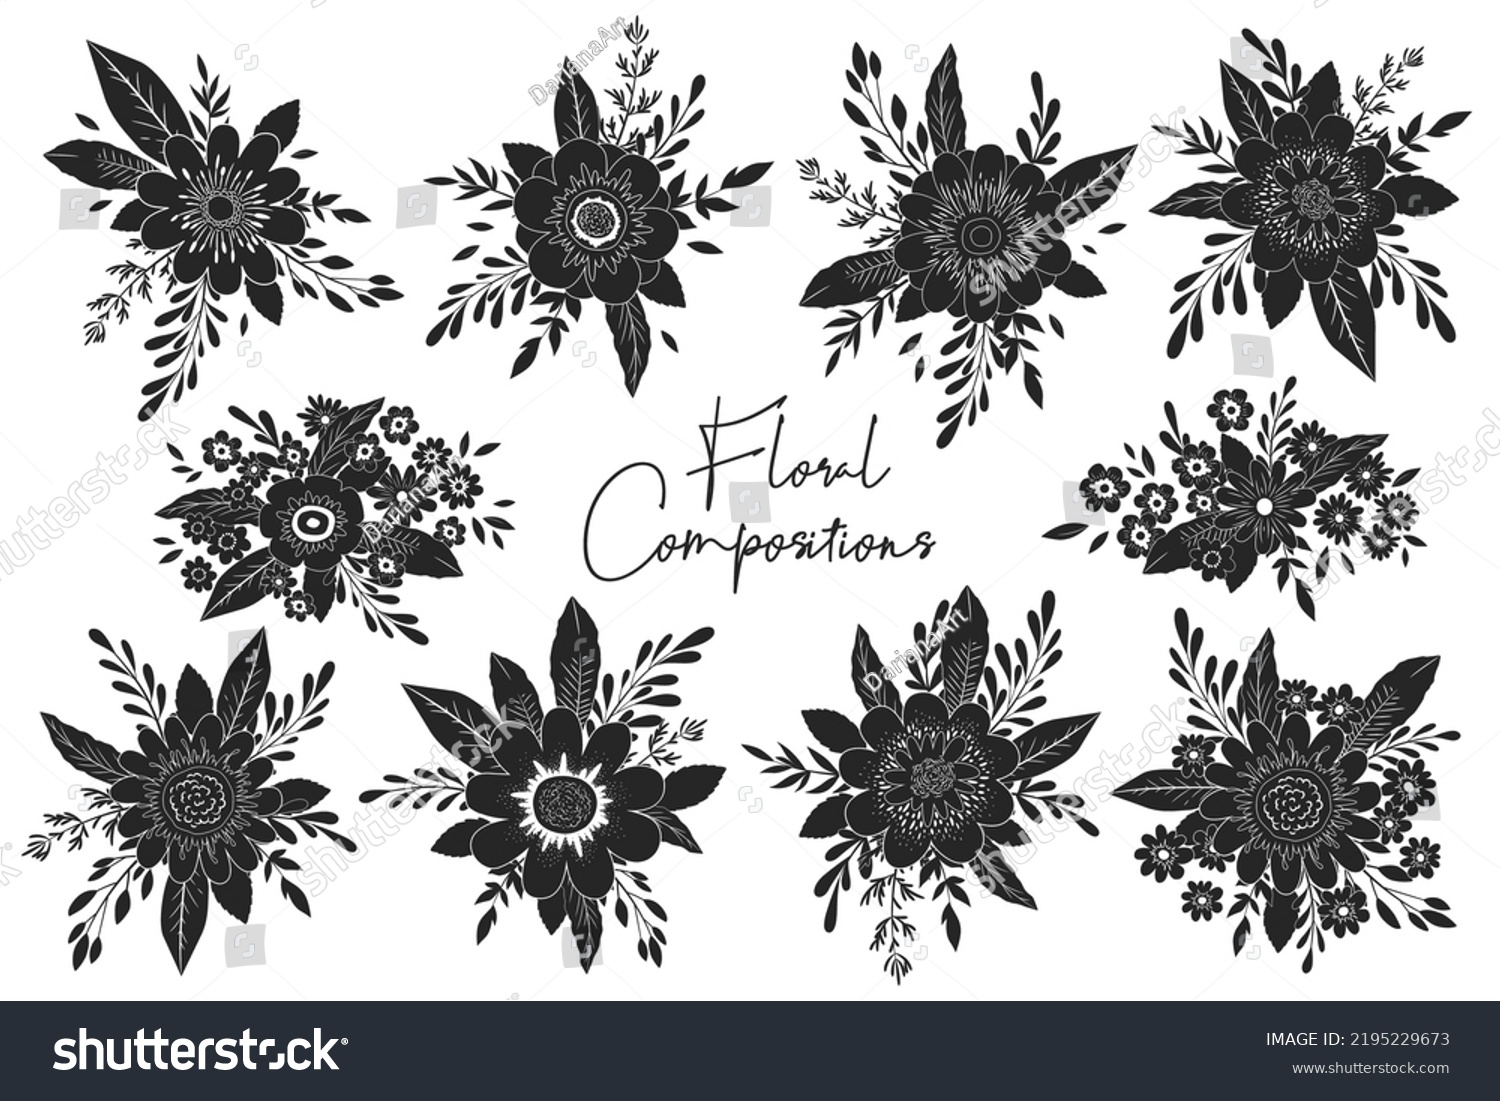 SVG of Vector set of black and white floral compositions from hand drawn flowers and leaves isolated on white background. Cutting bouquet templates for SVG files, wedding invitation, card svg